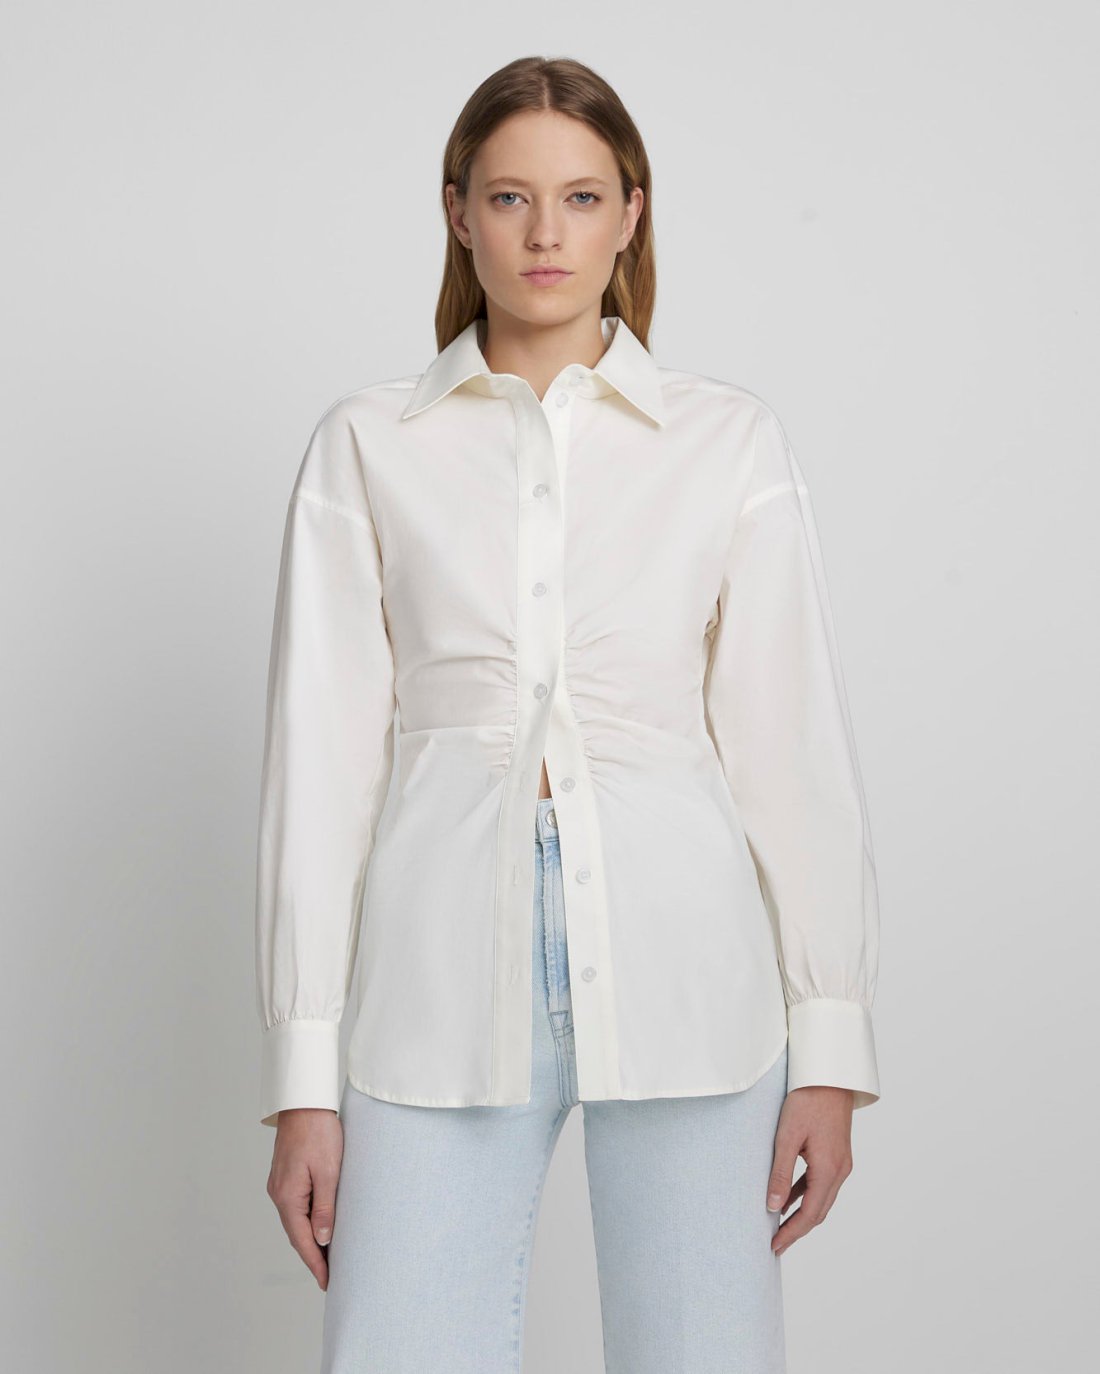 Cinched Waist Button Up Shirt in Antique White